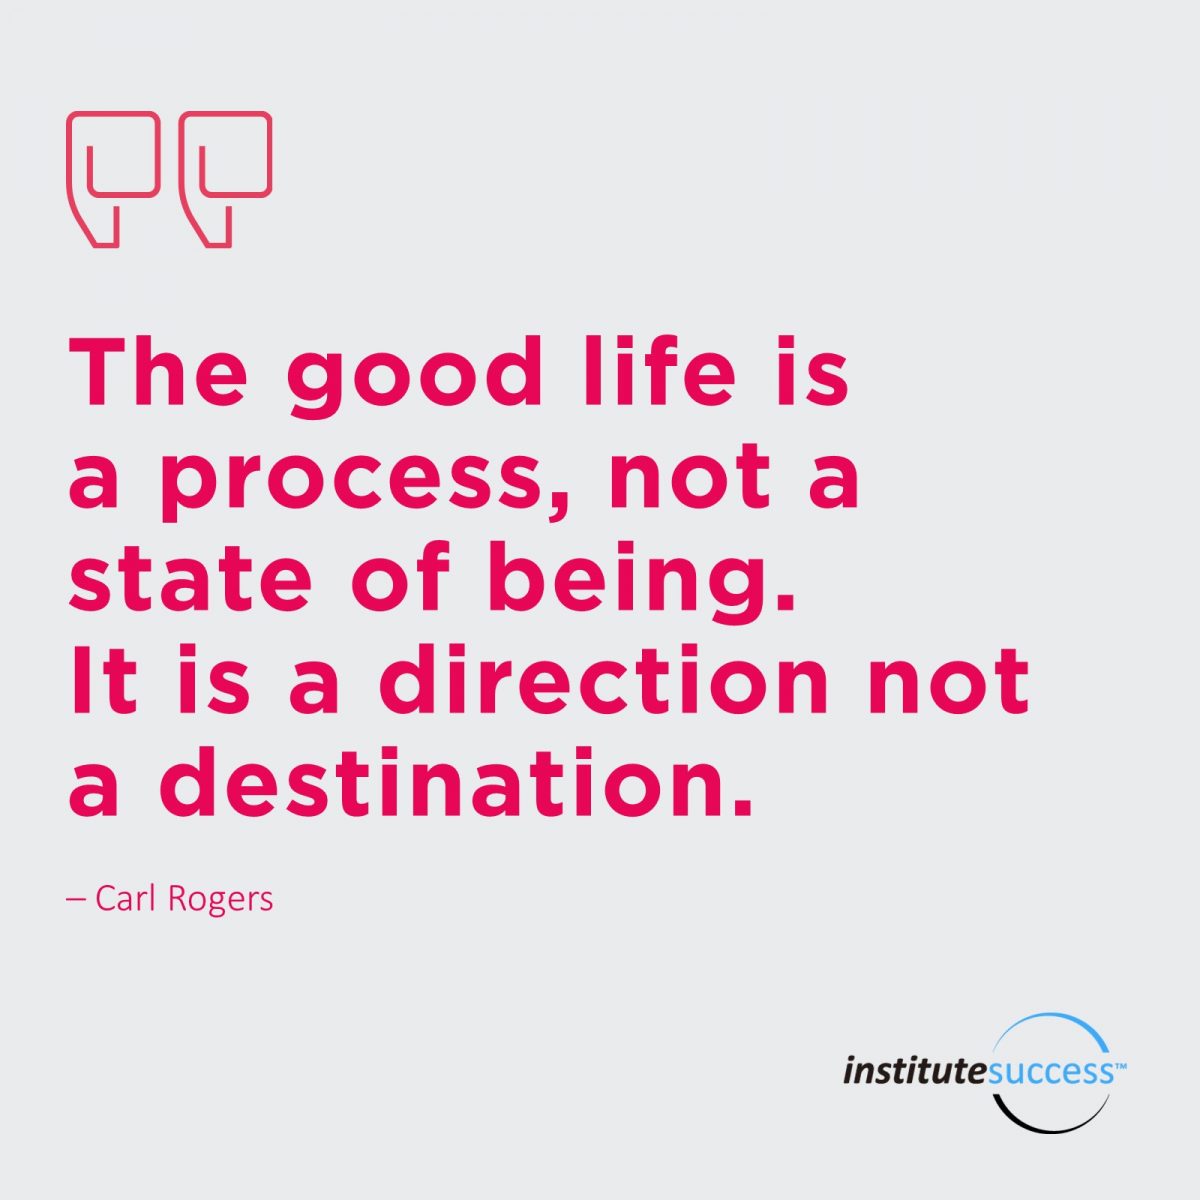 The good life is a process, not a state of being. It is a direction not a destination.  Carl Rogers